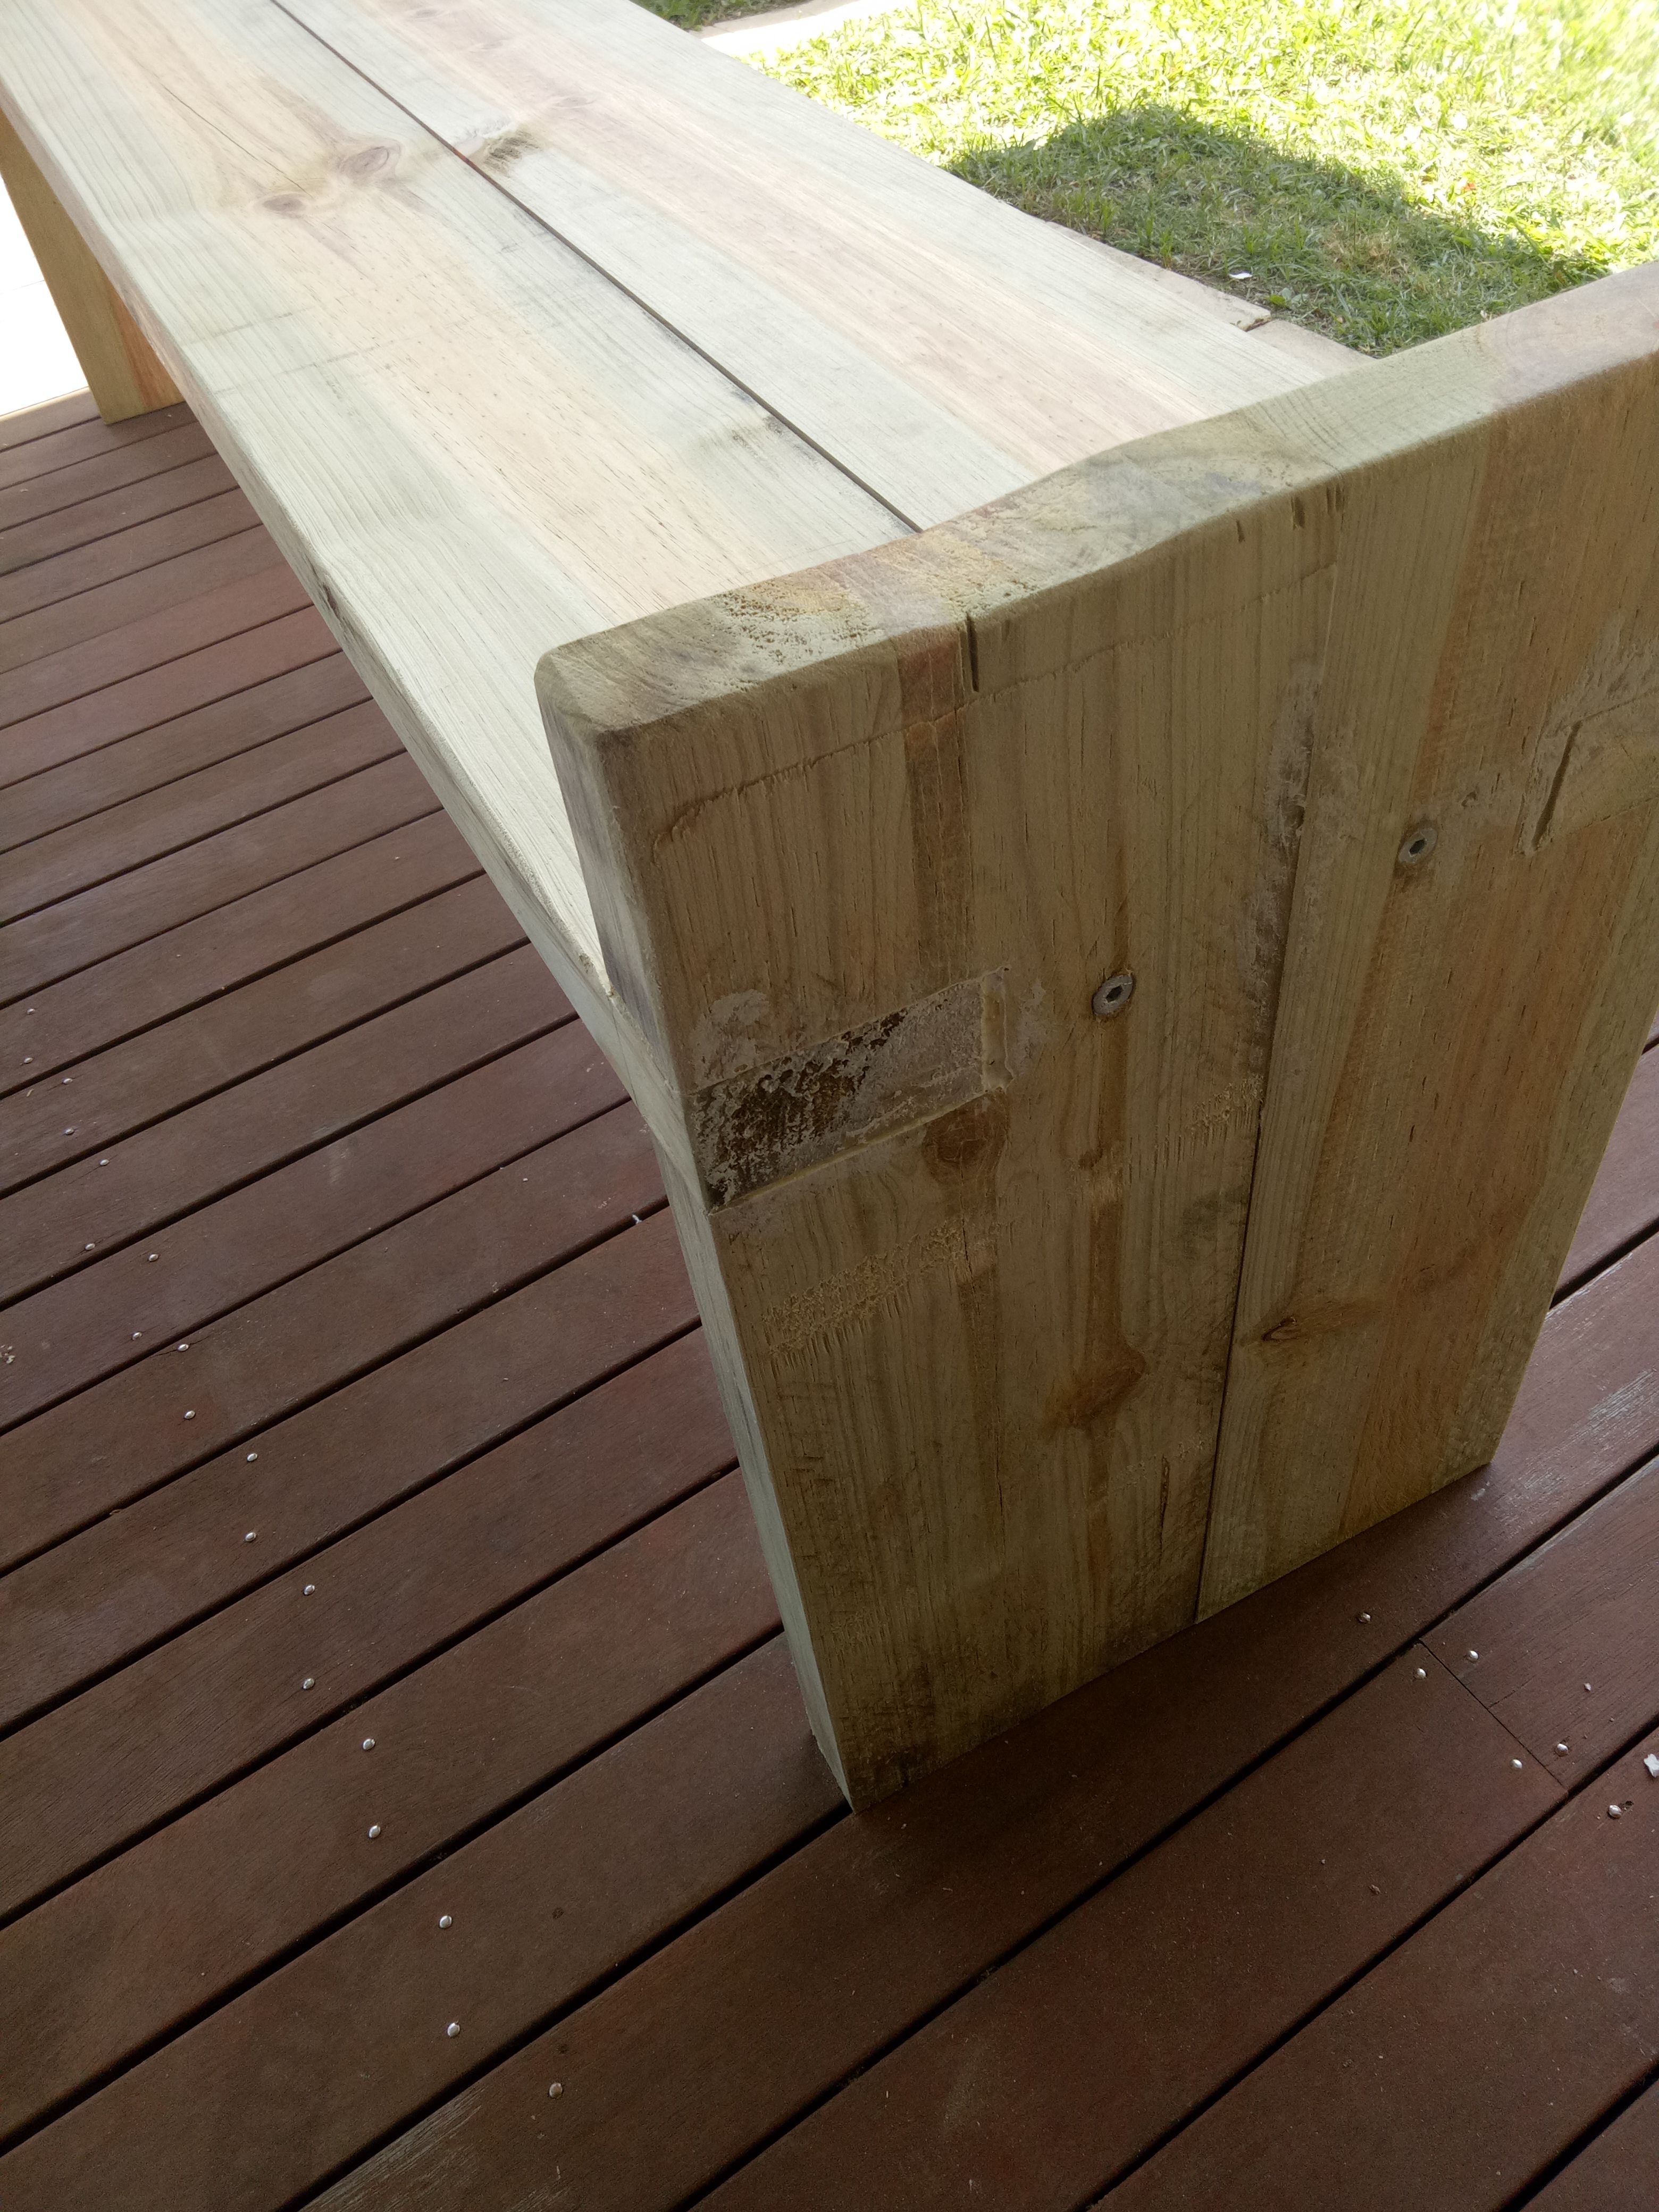 Timber bench seat | Bunnings Workshop community